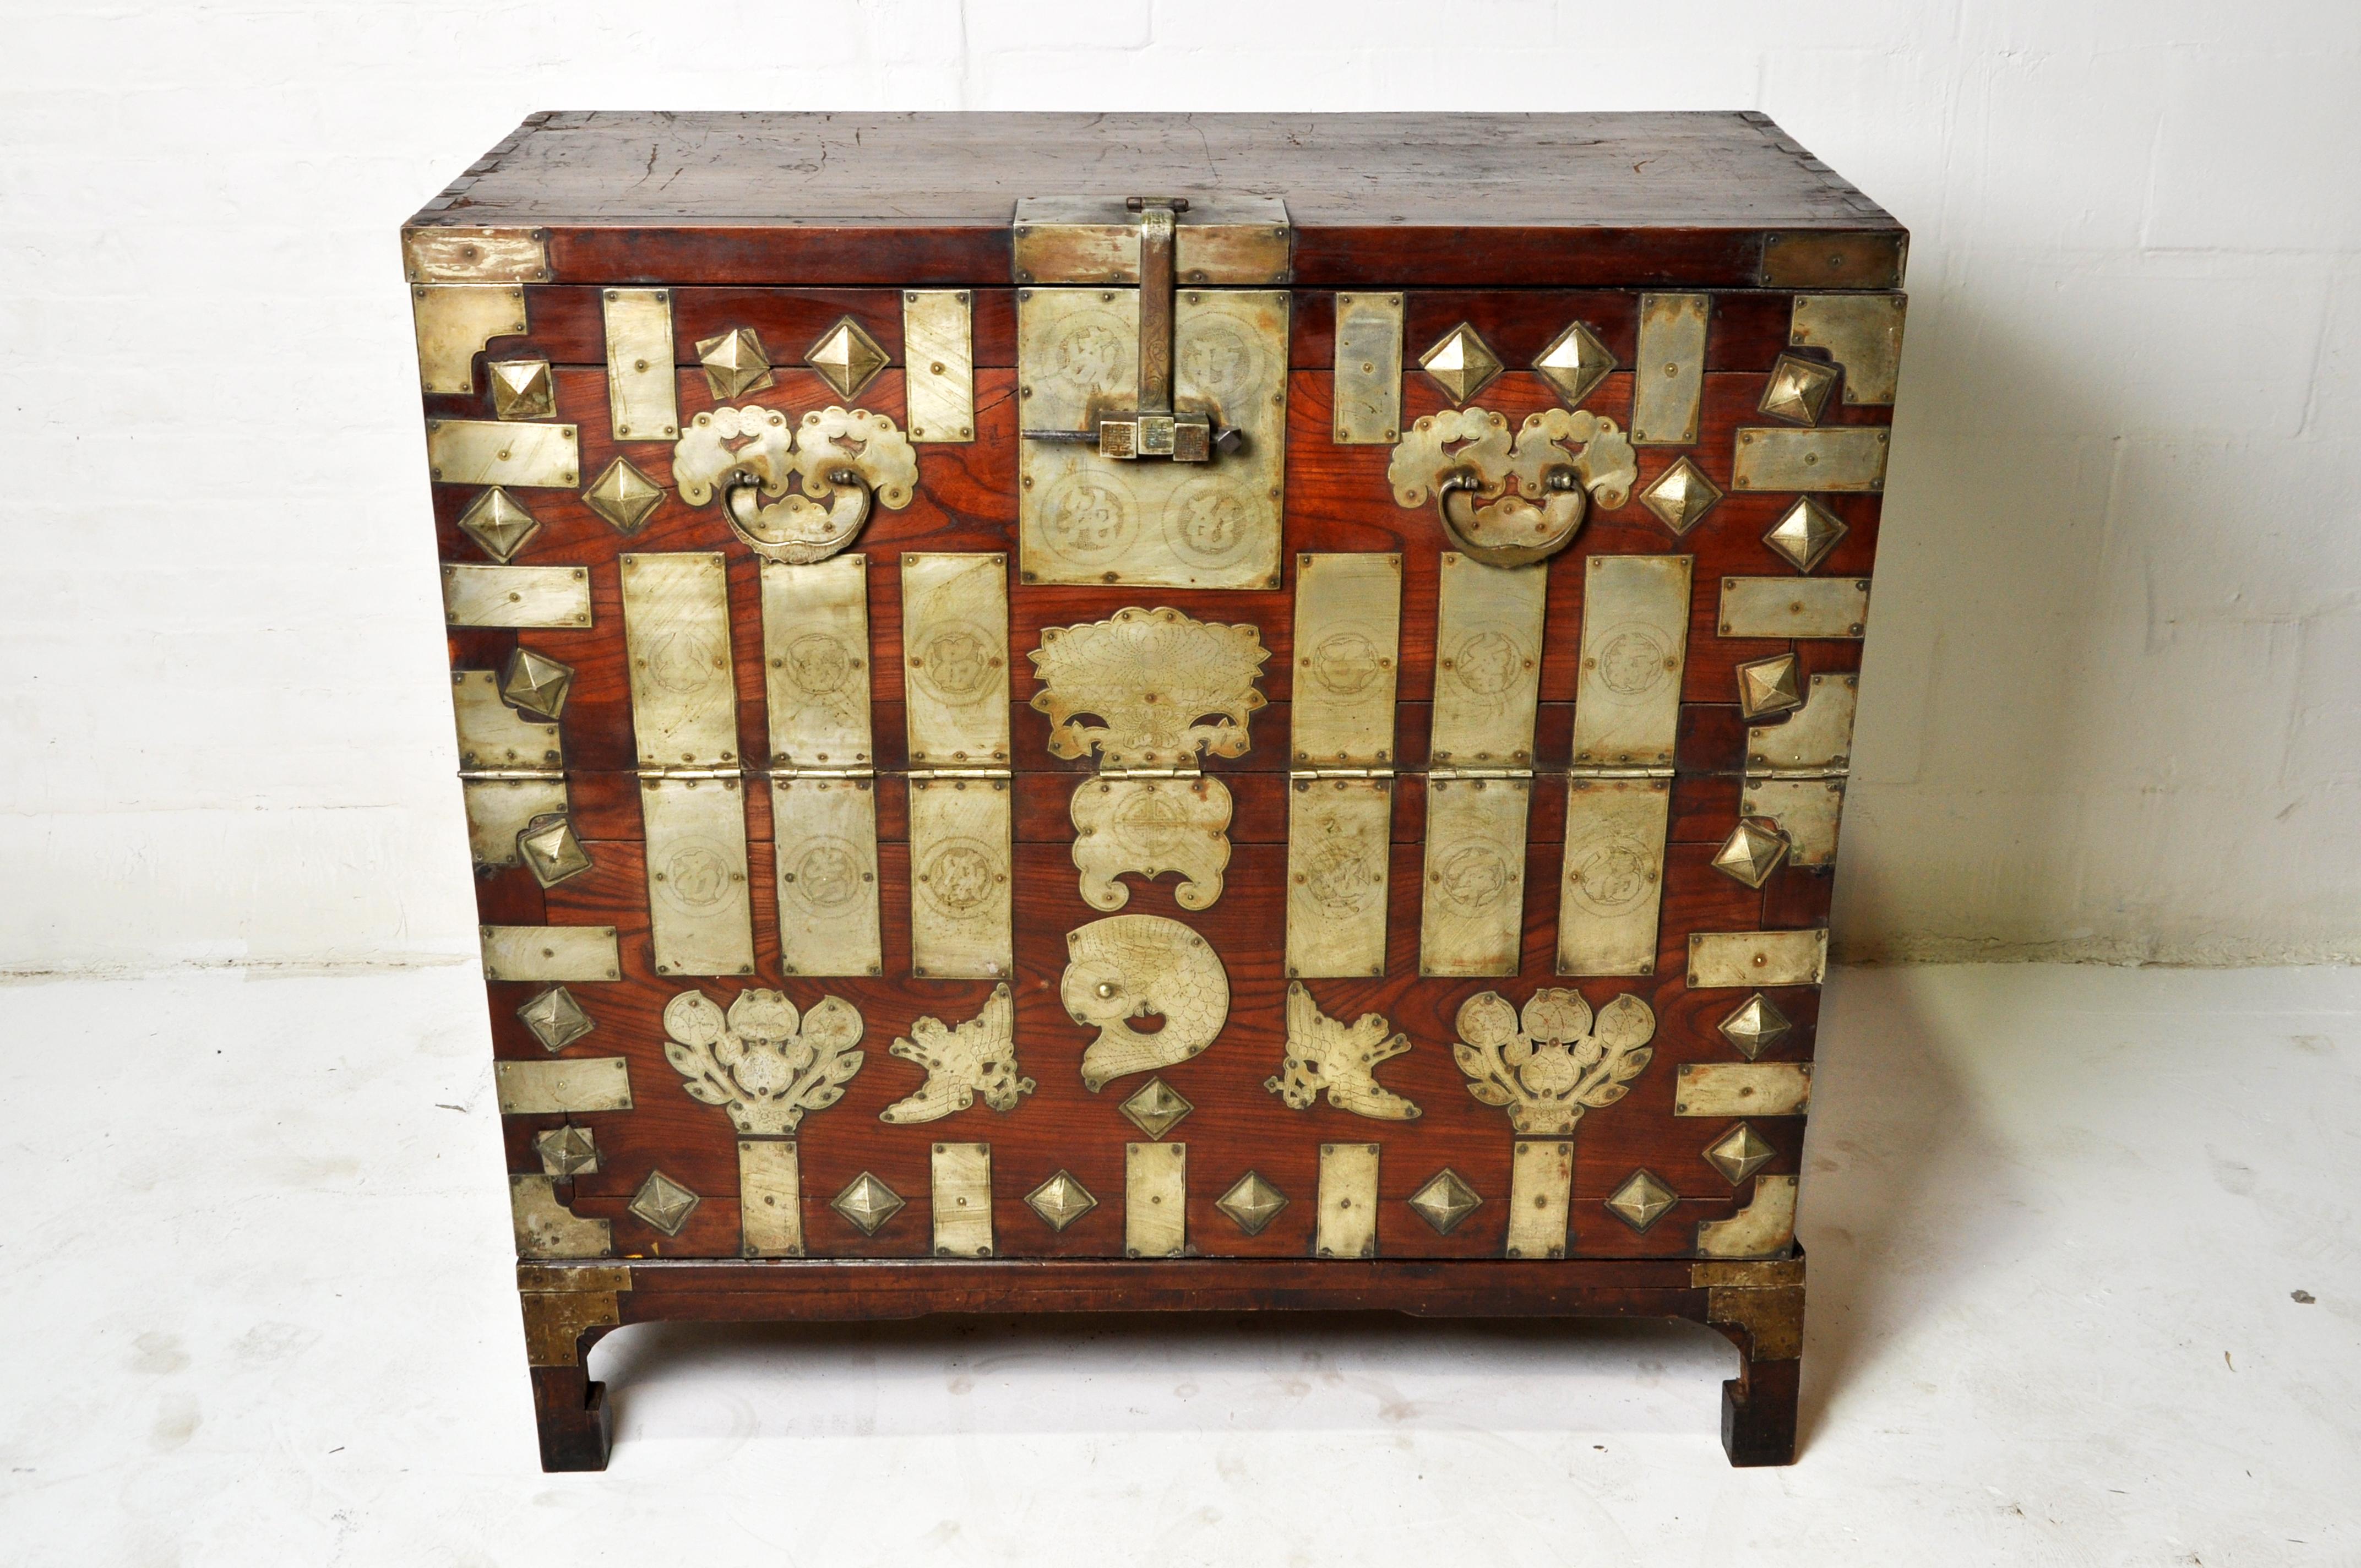 This brightly ornamented Korean chest was used to hold blankets, garments and other gifts that would be presented to the newlyweds as part of the dowry. It has a fall-front opening and large metal handles for carrying on either side. The elaborate